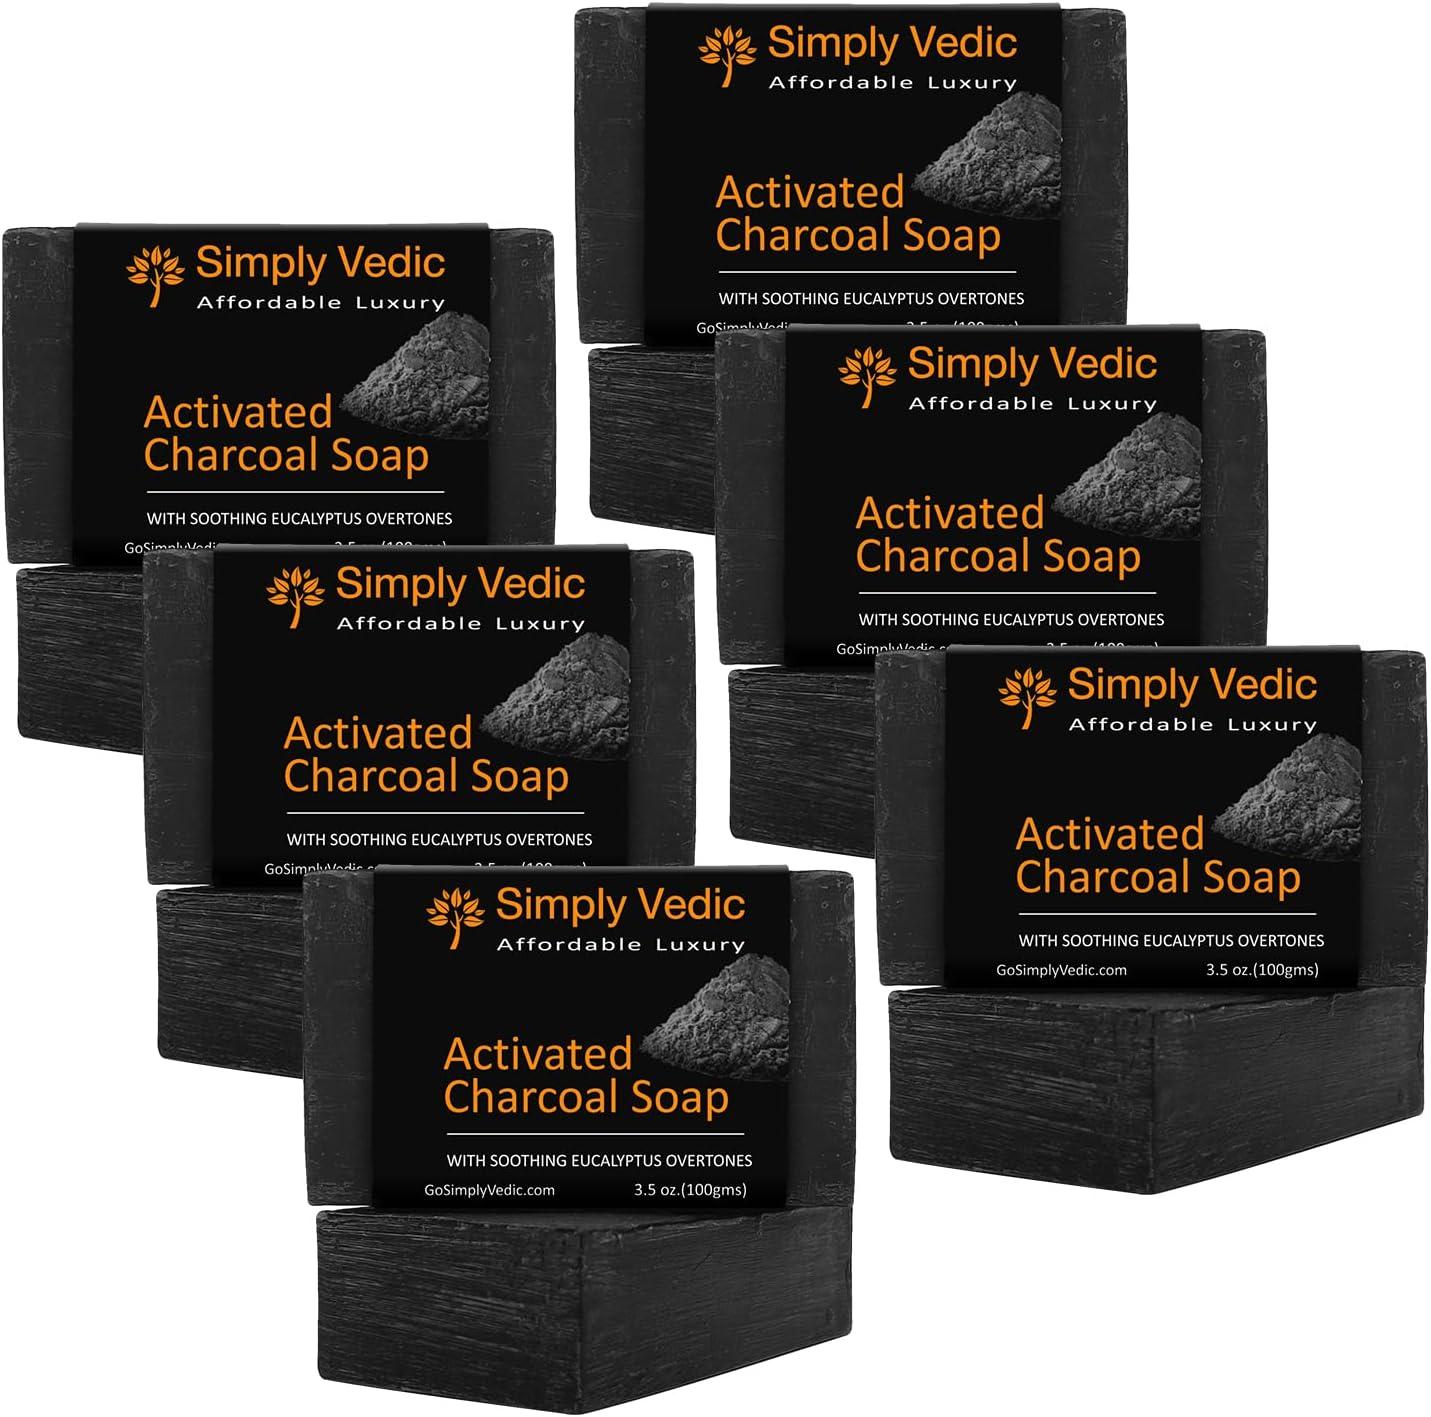 simply vedic 6-pack activated charcoal with eucalyptus essential oil soap bar 3.5 oz. x 6  simply vedic